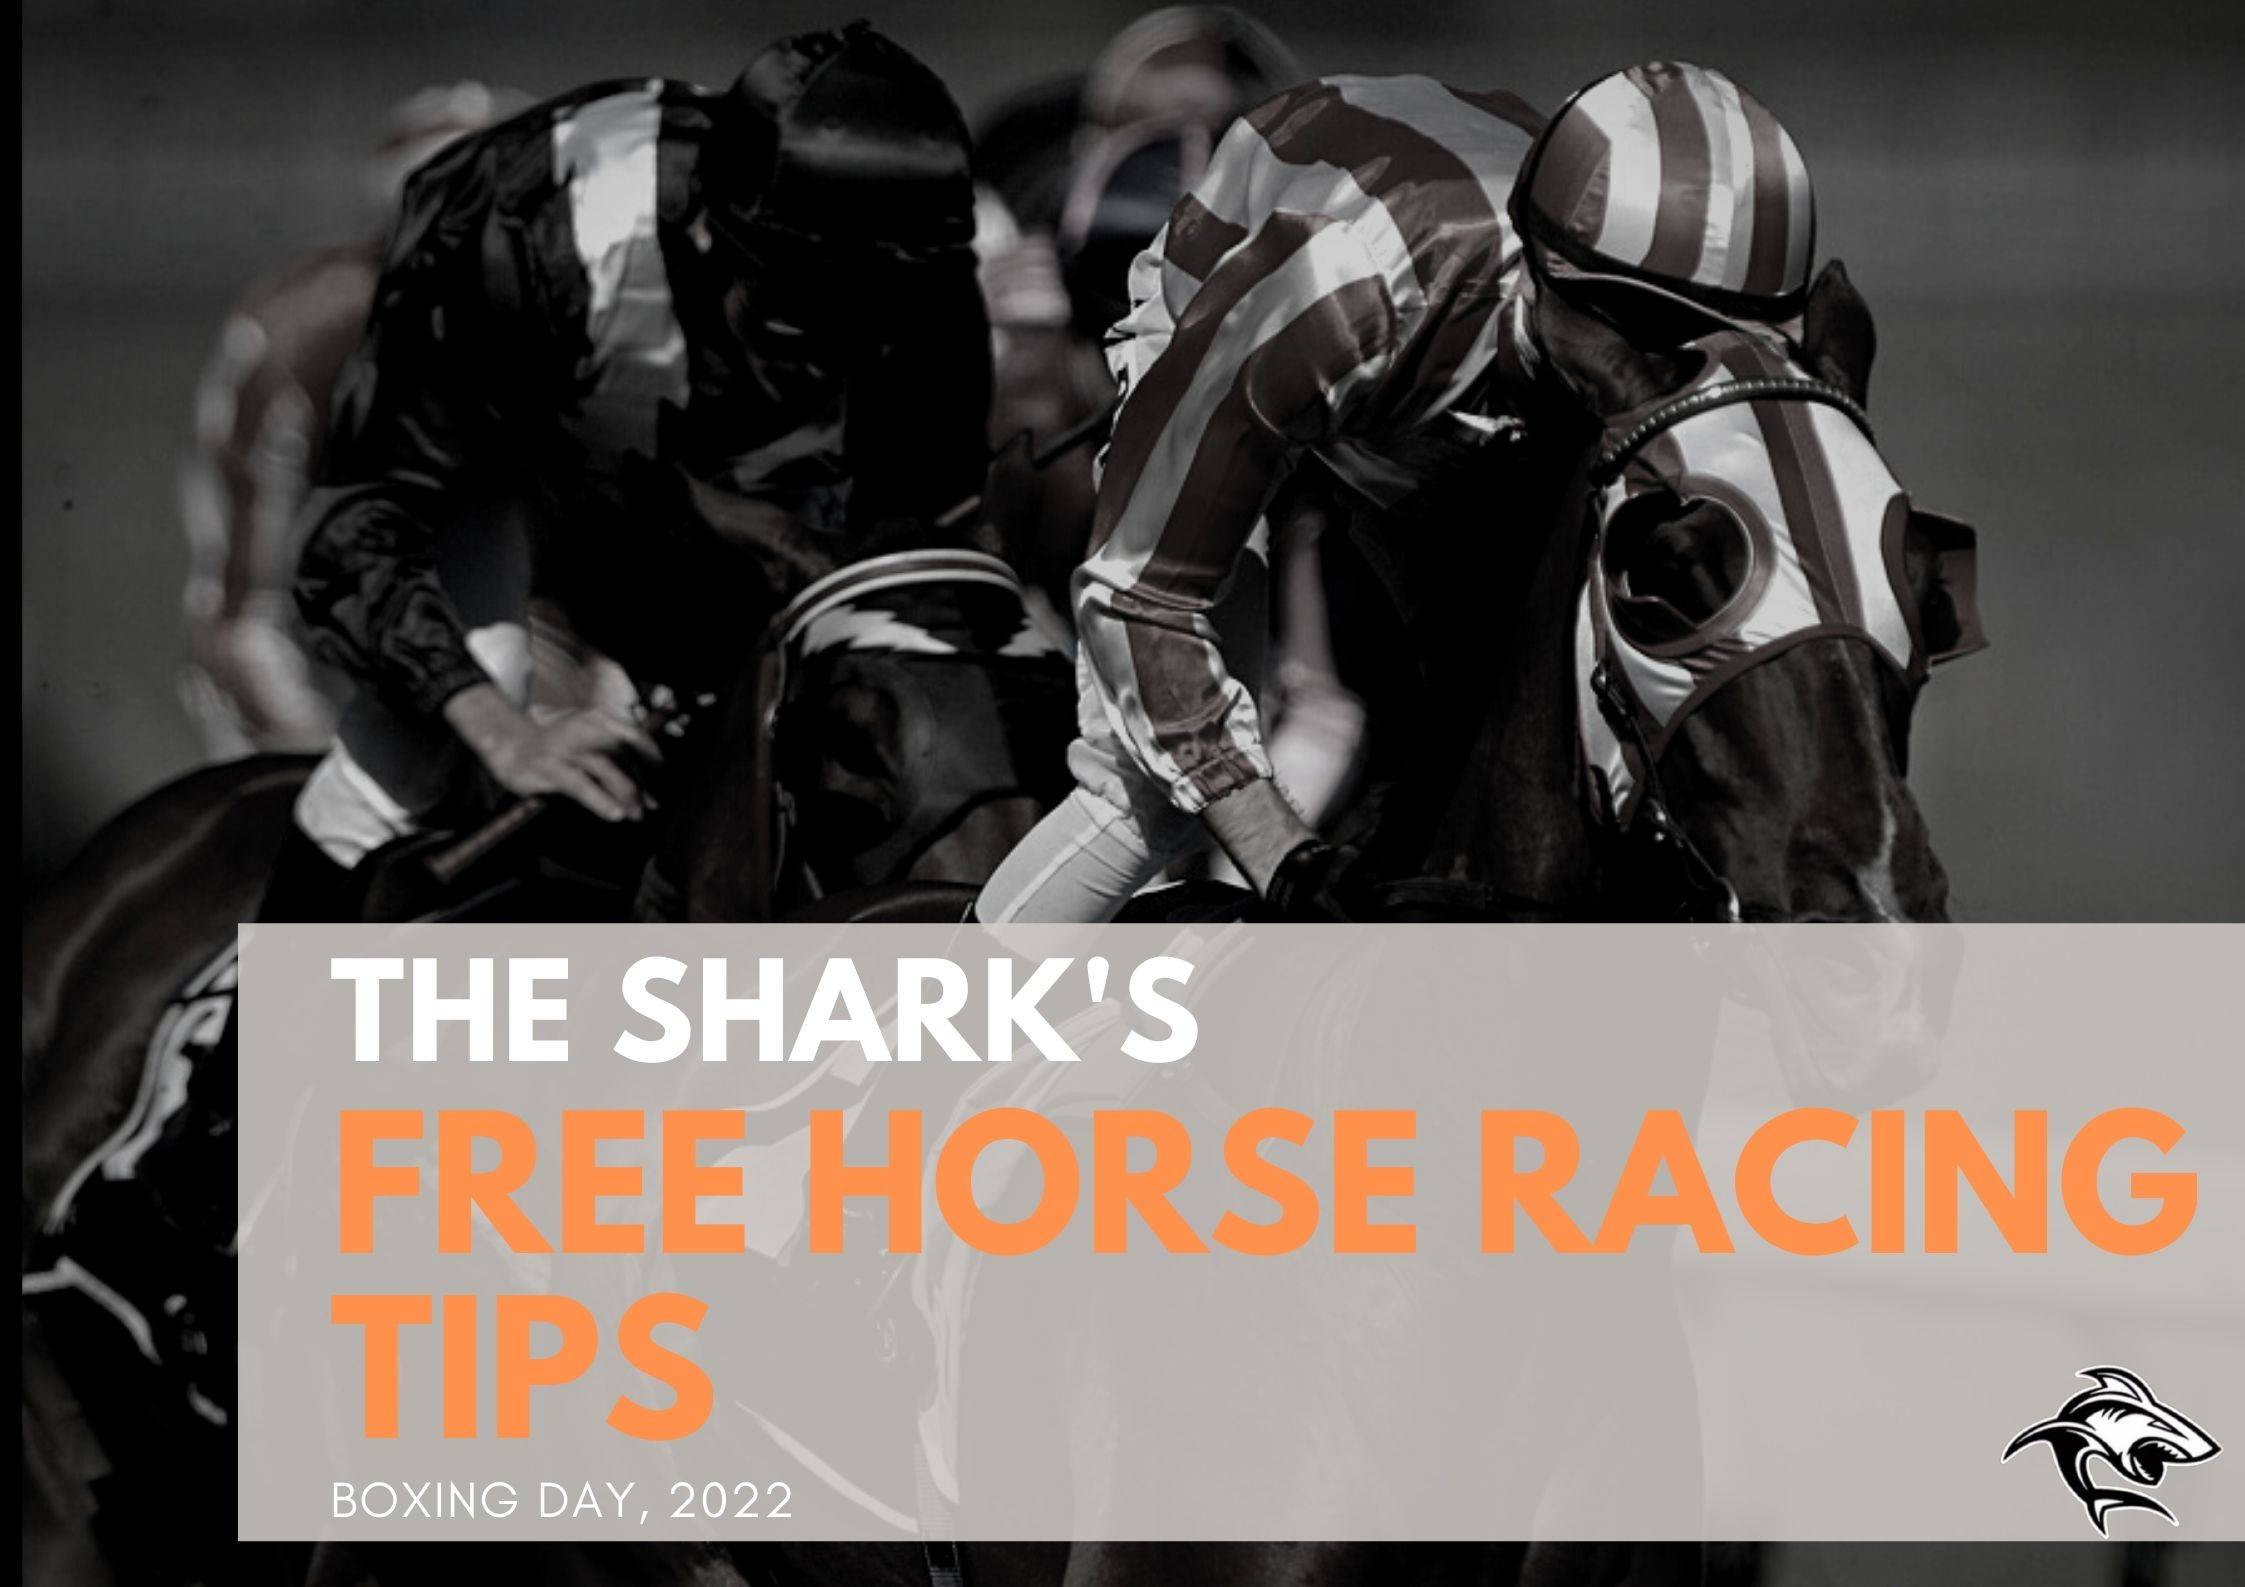 Free Horse Racing Tips - Boxing Day, 2022